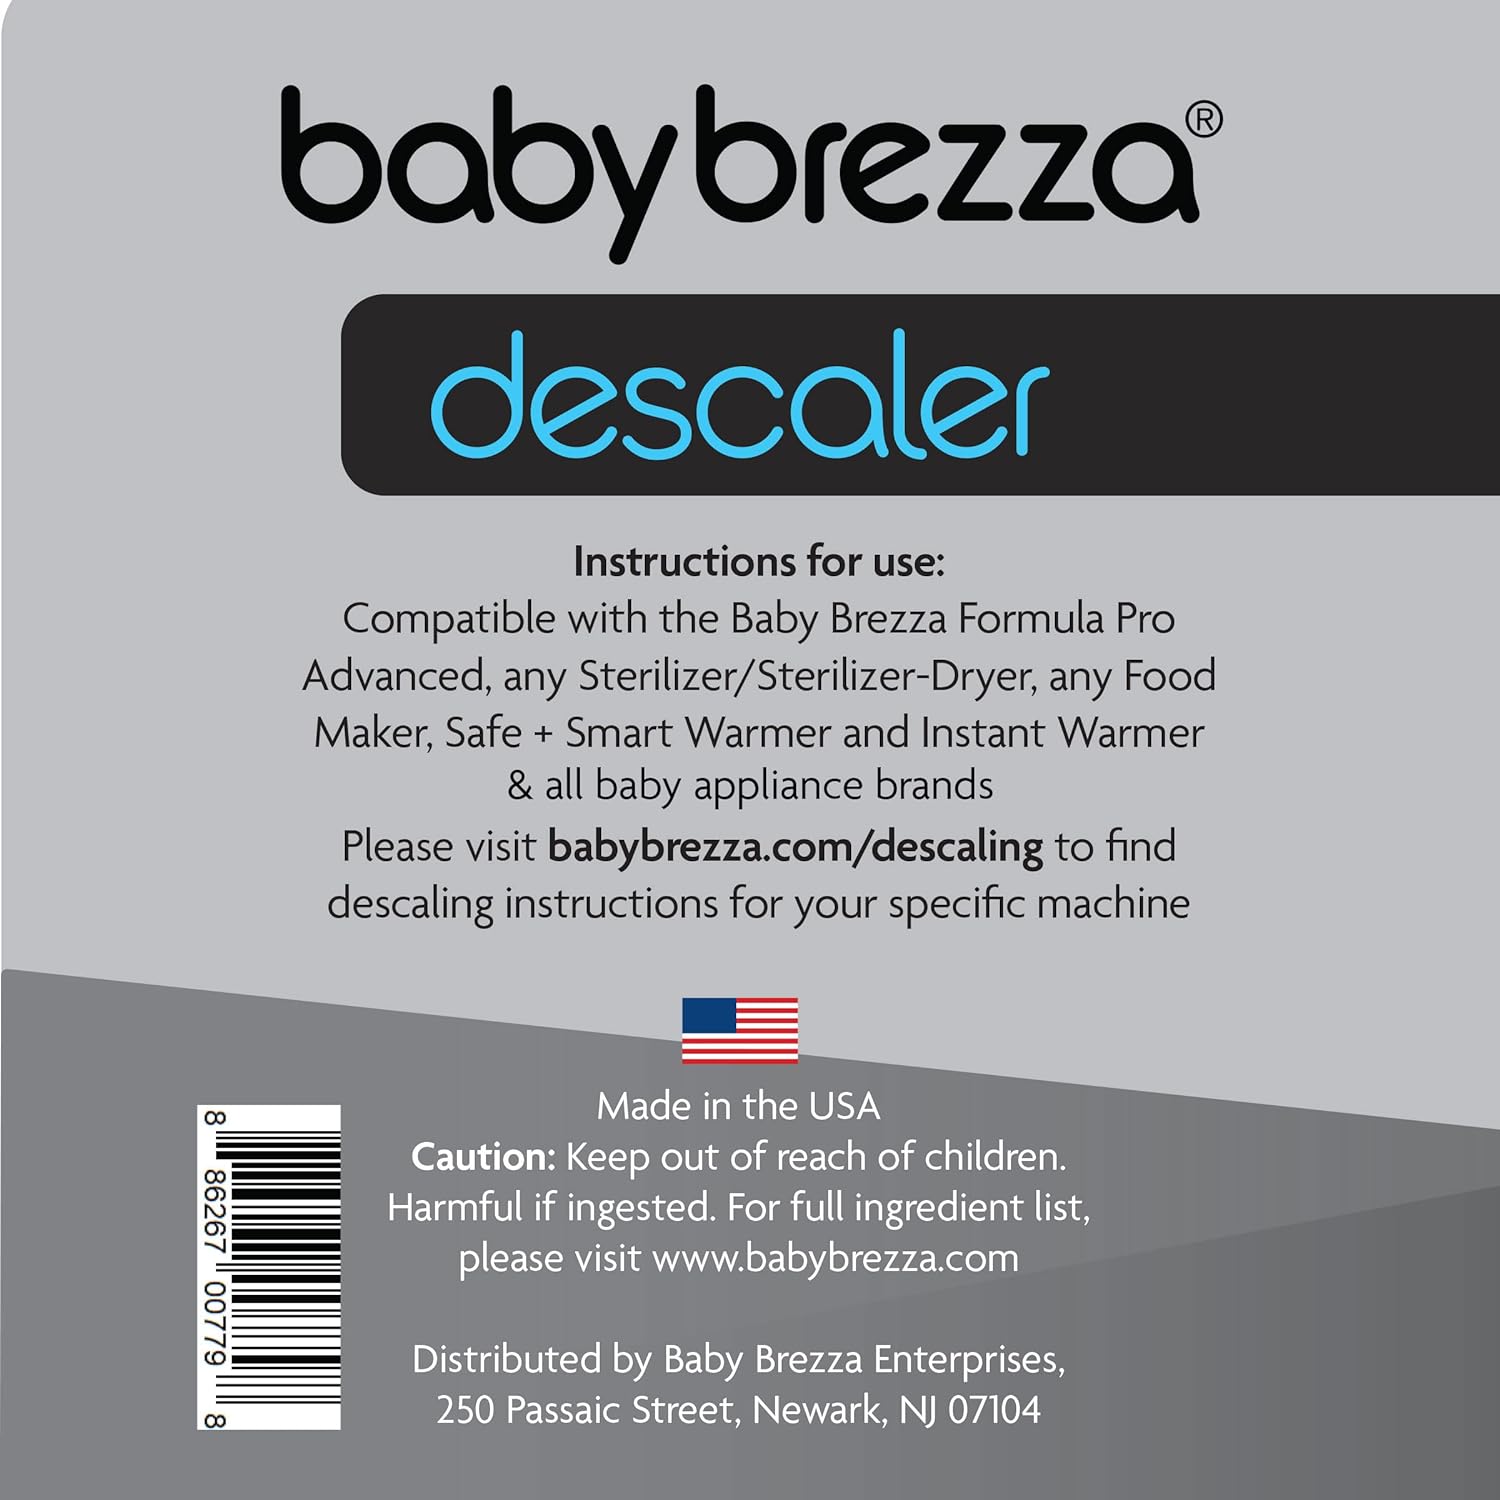 Baby Brezza Descaler 8 oz. Made in USA. Universal Descaling Solution for Baby Brezza and Other Baby appliances. Removes Mineral Build-up and extends Your Machine’s lifespan. : Baby